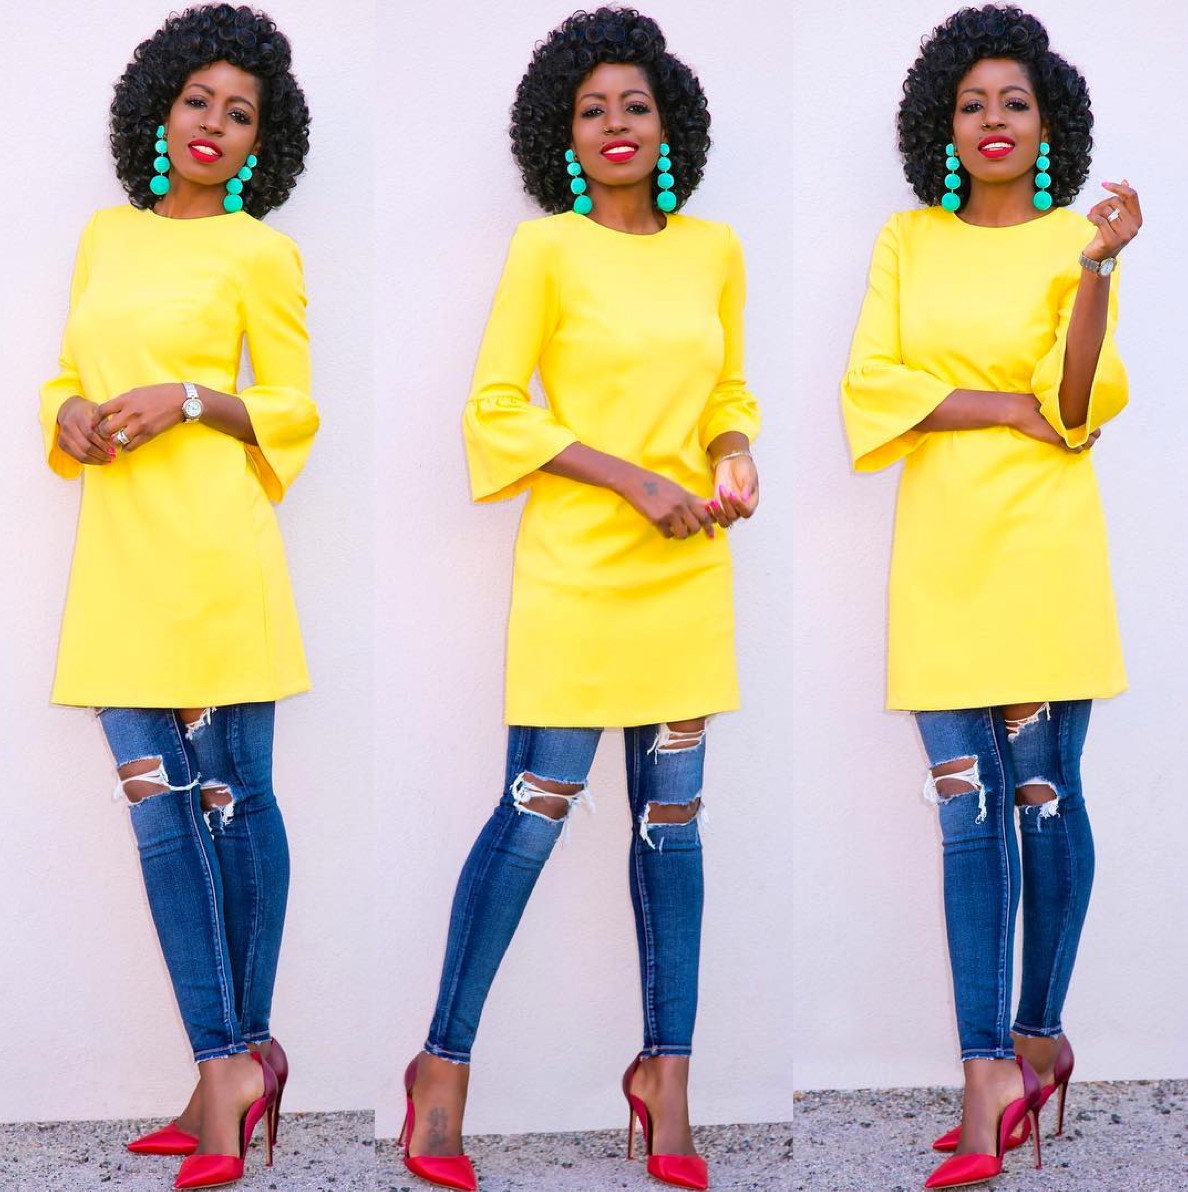 Black Fashion Bloggers Show Us How To Remix Spring's Hottest Trends ...